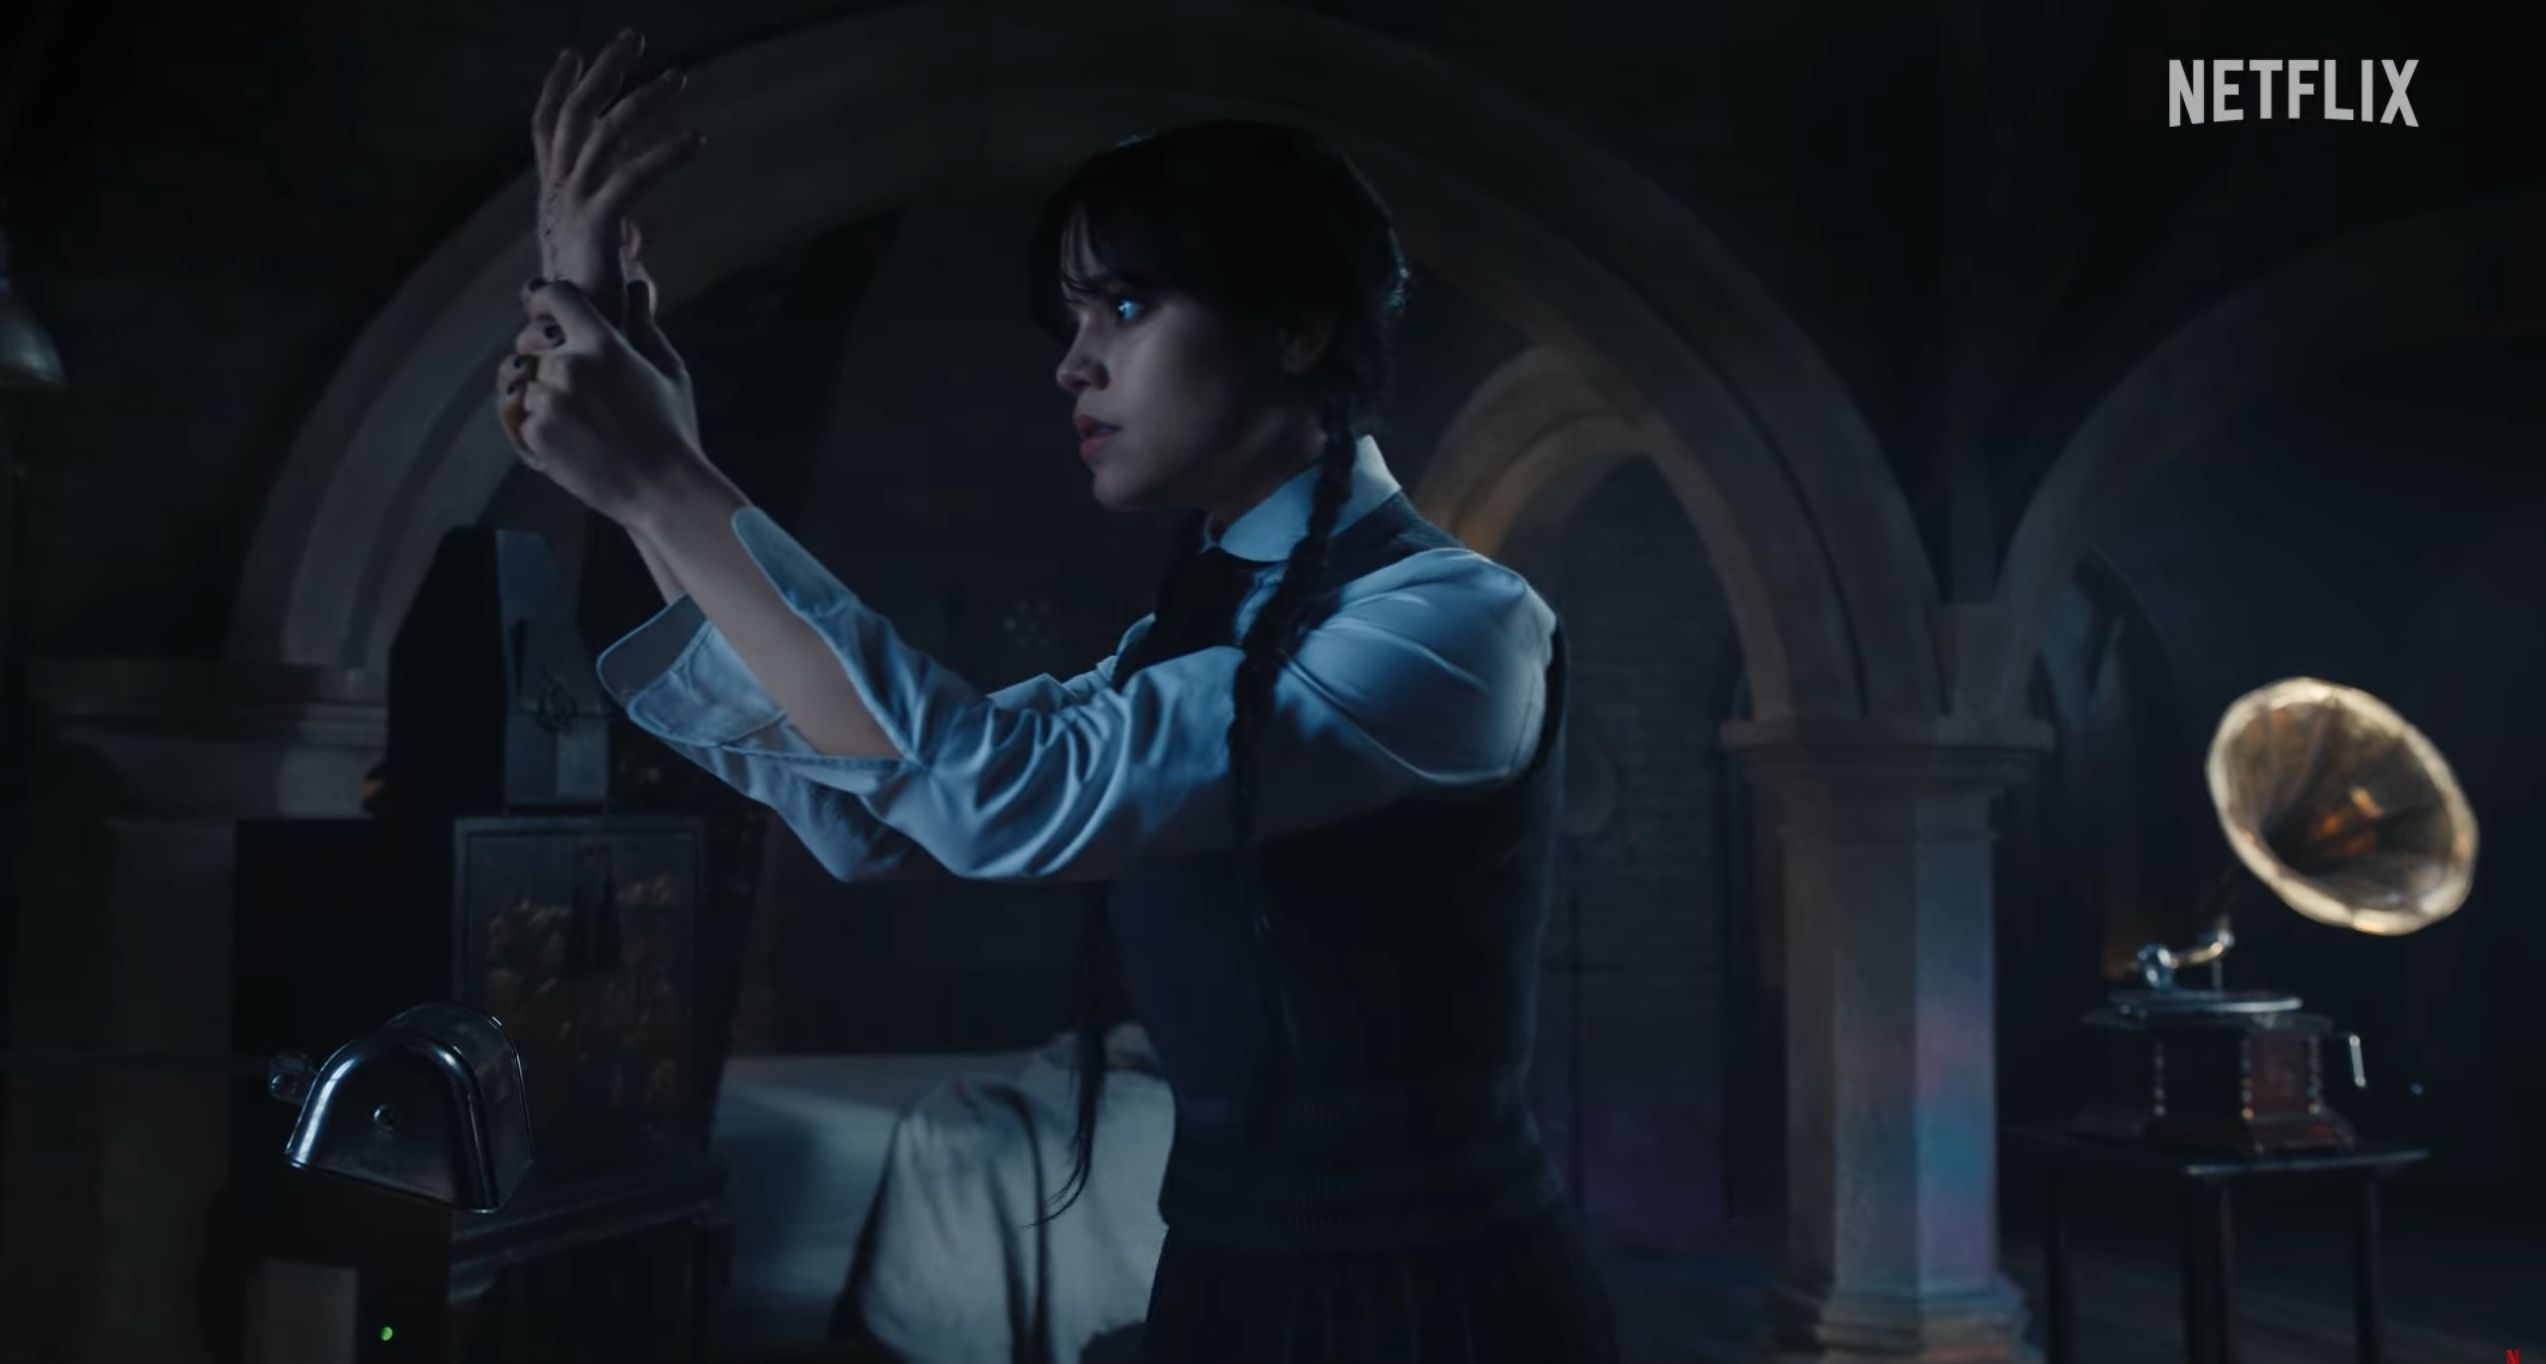 Wednesday Addams and Ice Cold Hands: Trailer for the new Netflix series